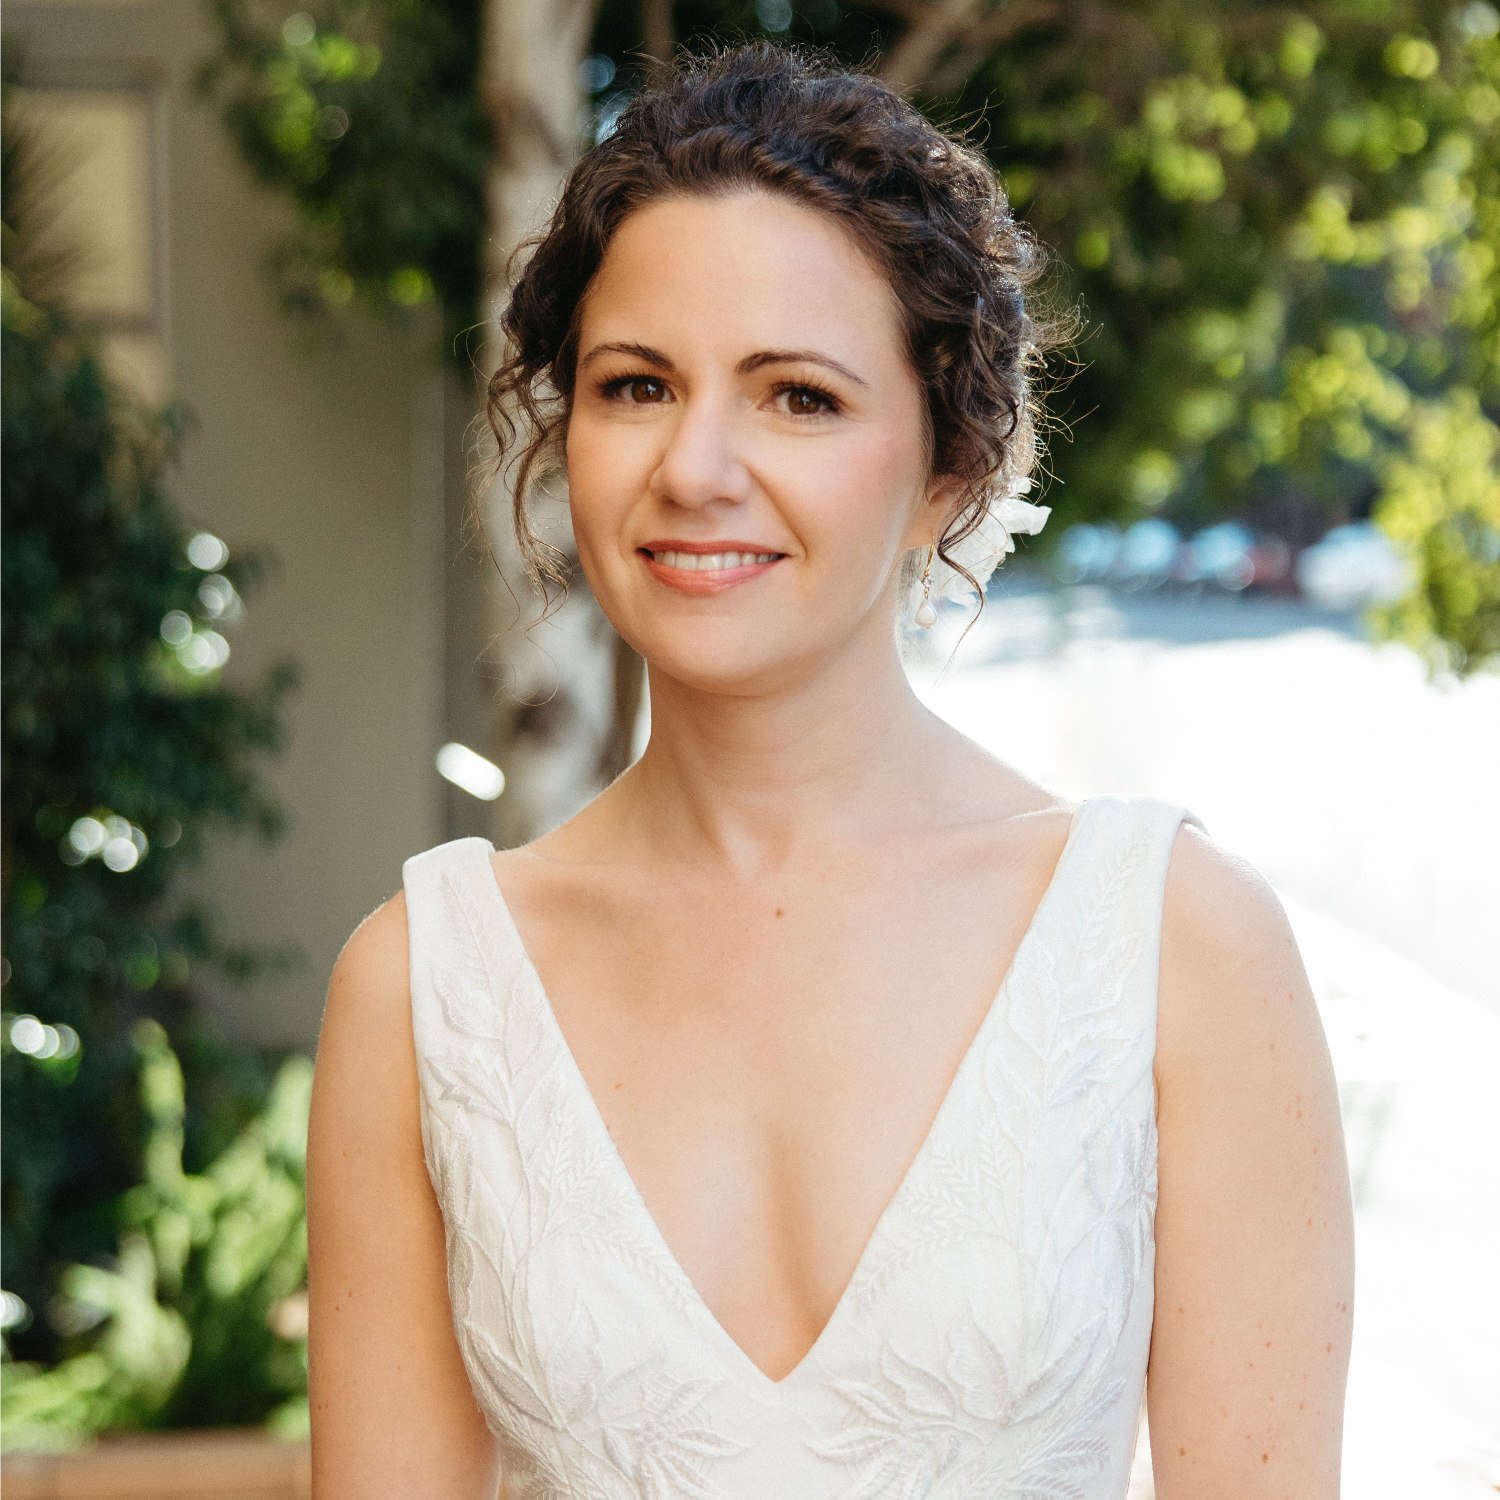 Curly hair bridal hairstyle, natural makeup, Terrace Room, Oakland, photo by Angela Jazmin Studio